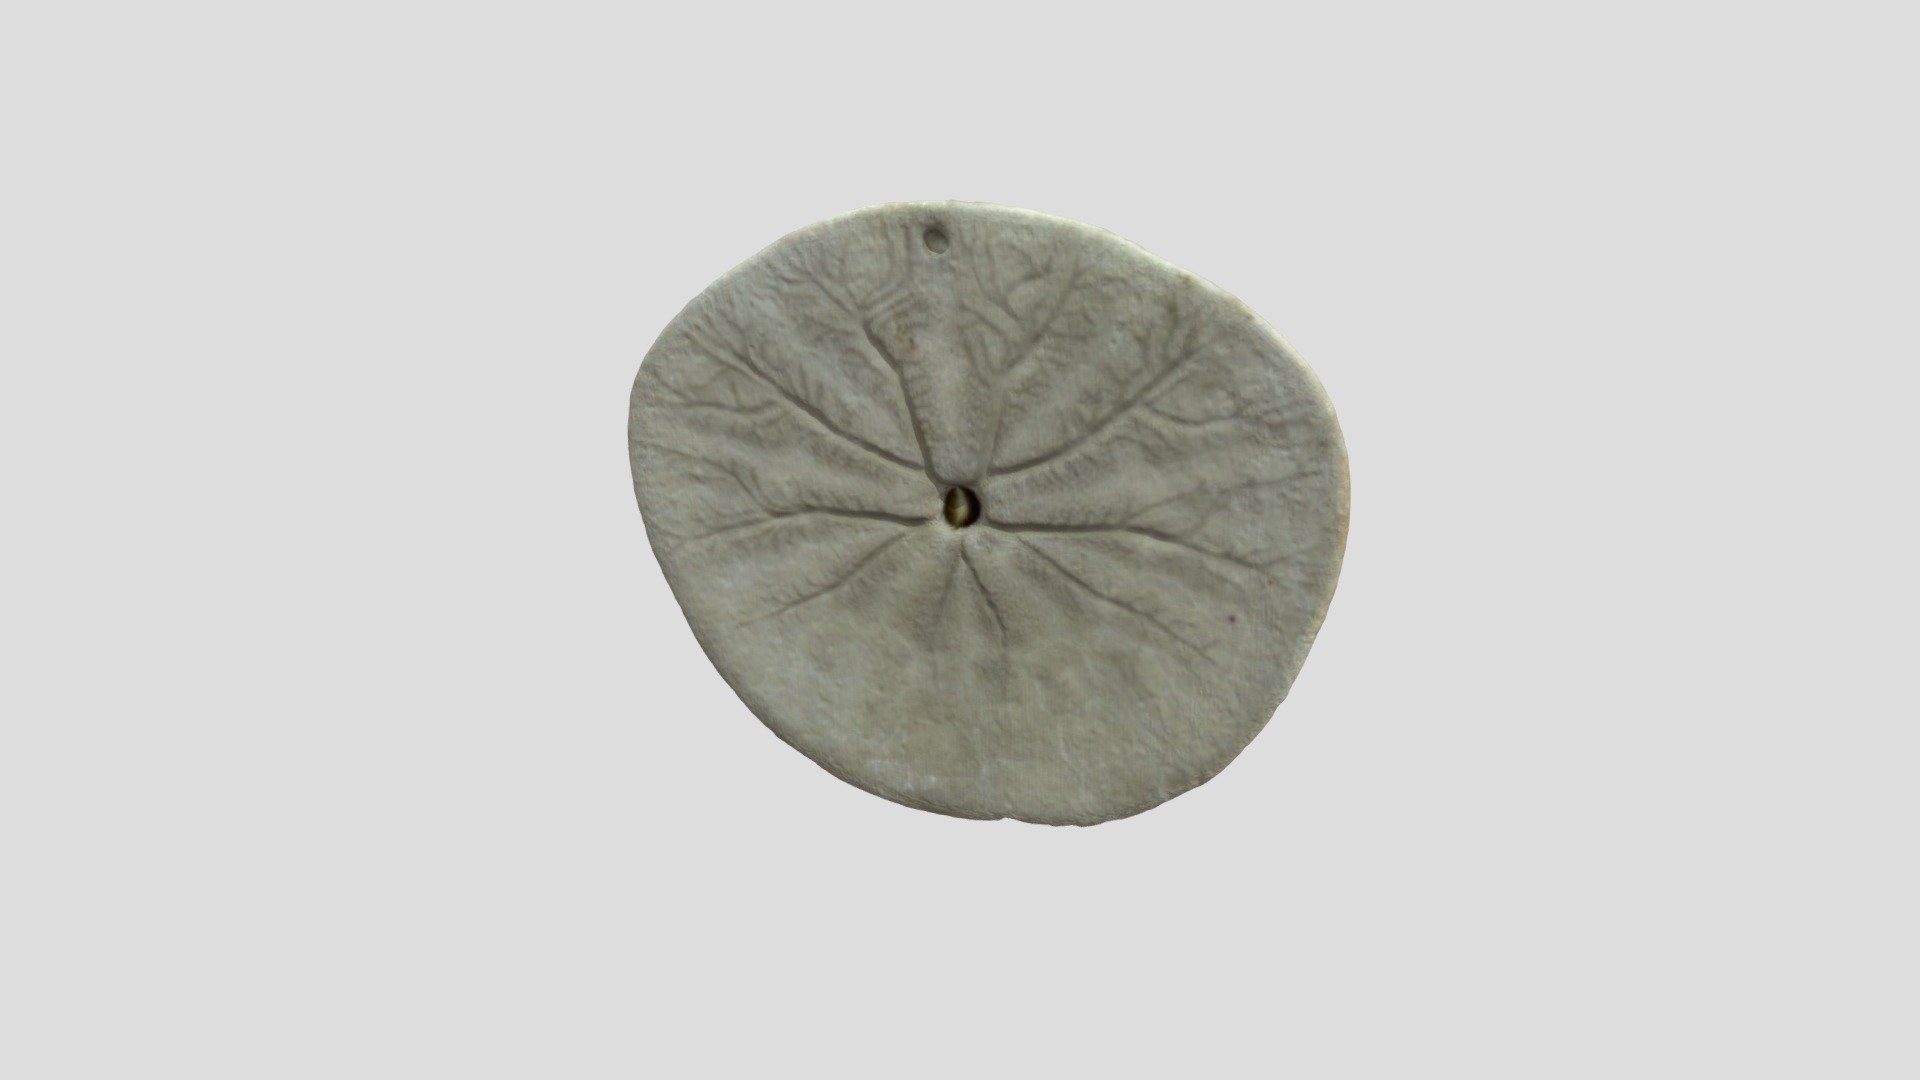 Sand dollars (also known as a sea cookie or snapper biscuit in New Zealand, or pansy shell in South Africa) are species of flat, burrowing sea urchins belonging to the order Clypeasteroida.
Sand dollars possess a rigid skeleton called a test. The test consists of calcium carbonate plates arranged in a fivefold symmetric pattern.
This one was found on the beach of the coast in Oregon, USA.
Scanned with EinScan-SE, medium resoution mesh, further decimated to reduce size below 100Mb 3d model